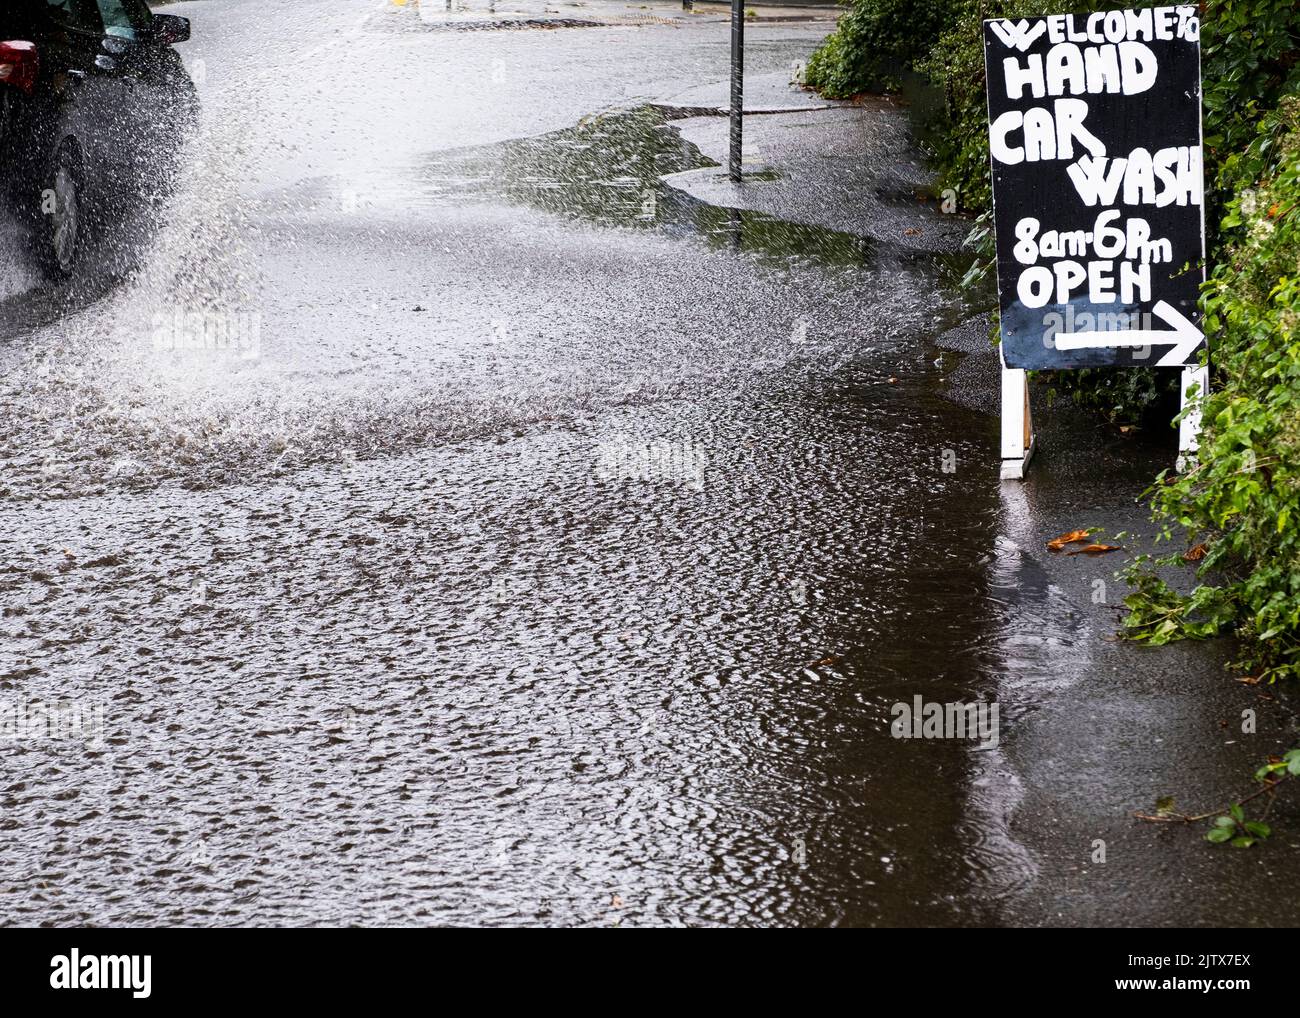 A car splashing standing flood rainwater on a road during a rain storm by a car wash sign Stock Photo